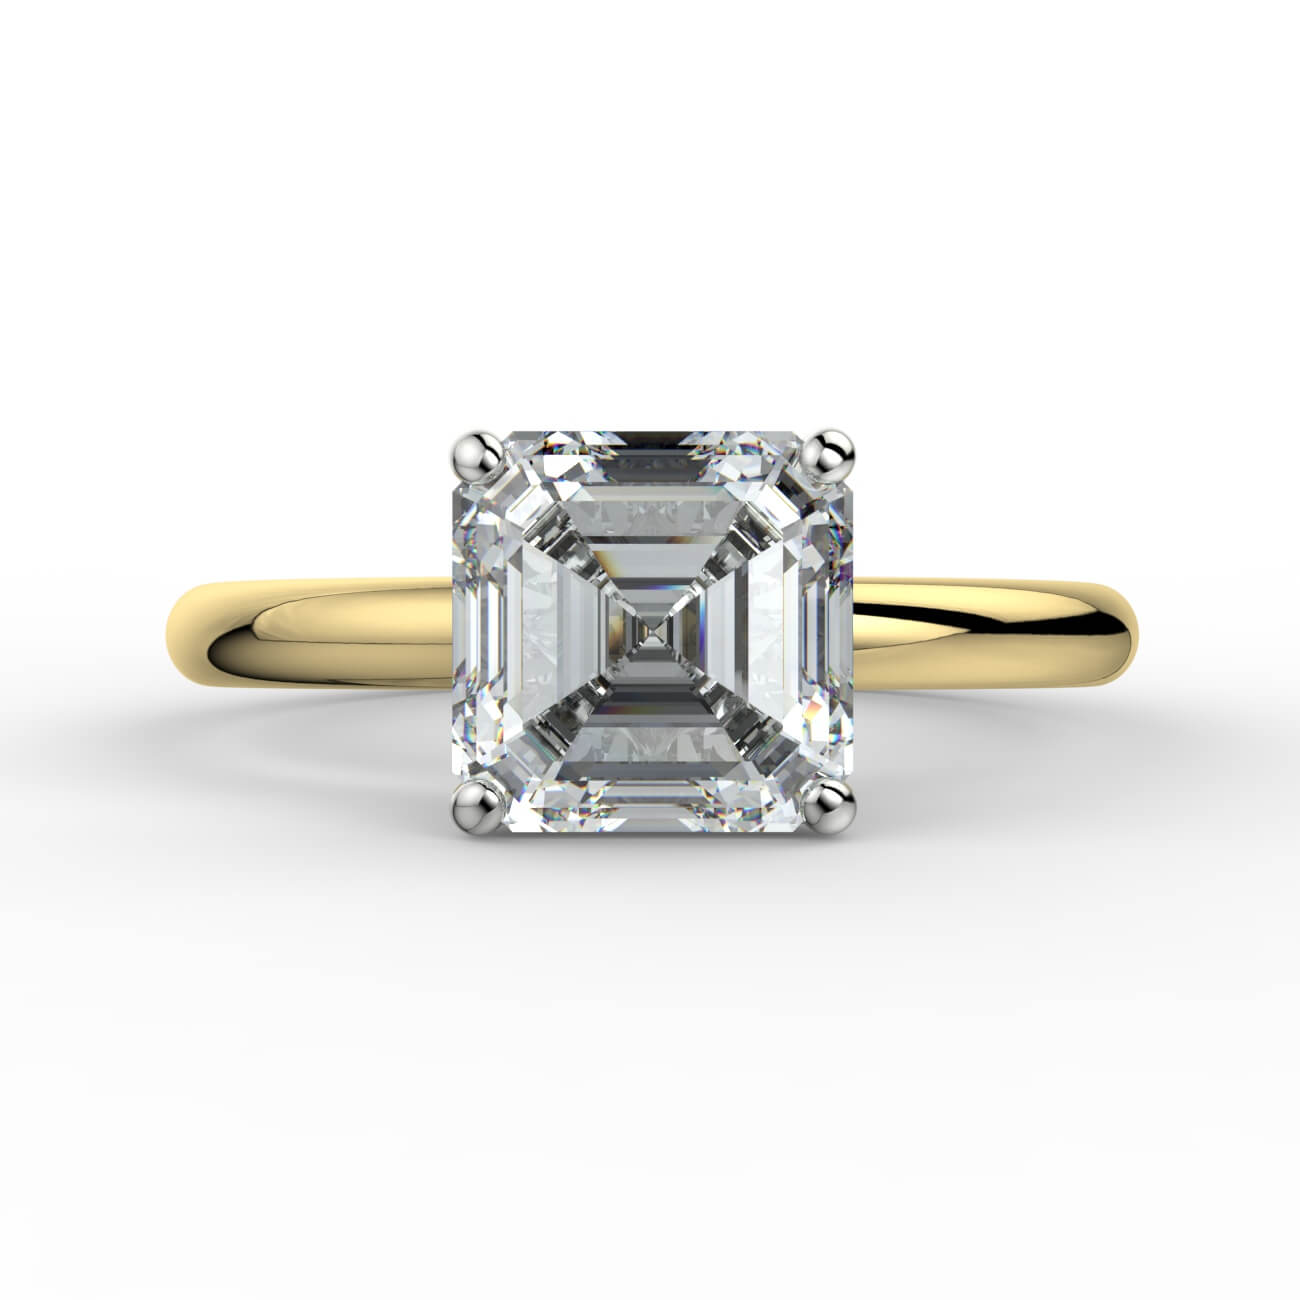 Comfort fit 4 claw asscher cut solitaire diamond ring in yellow and white gold – Australian Diamond Network